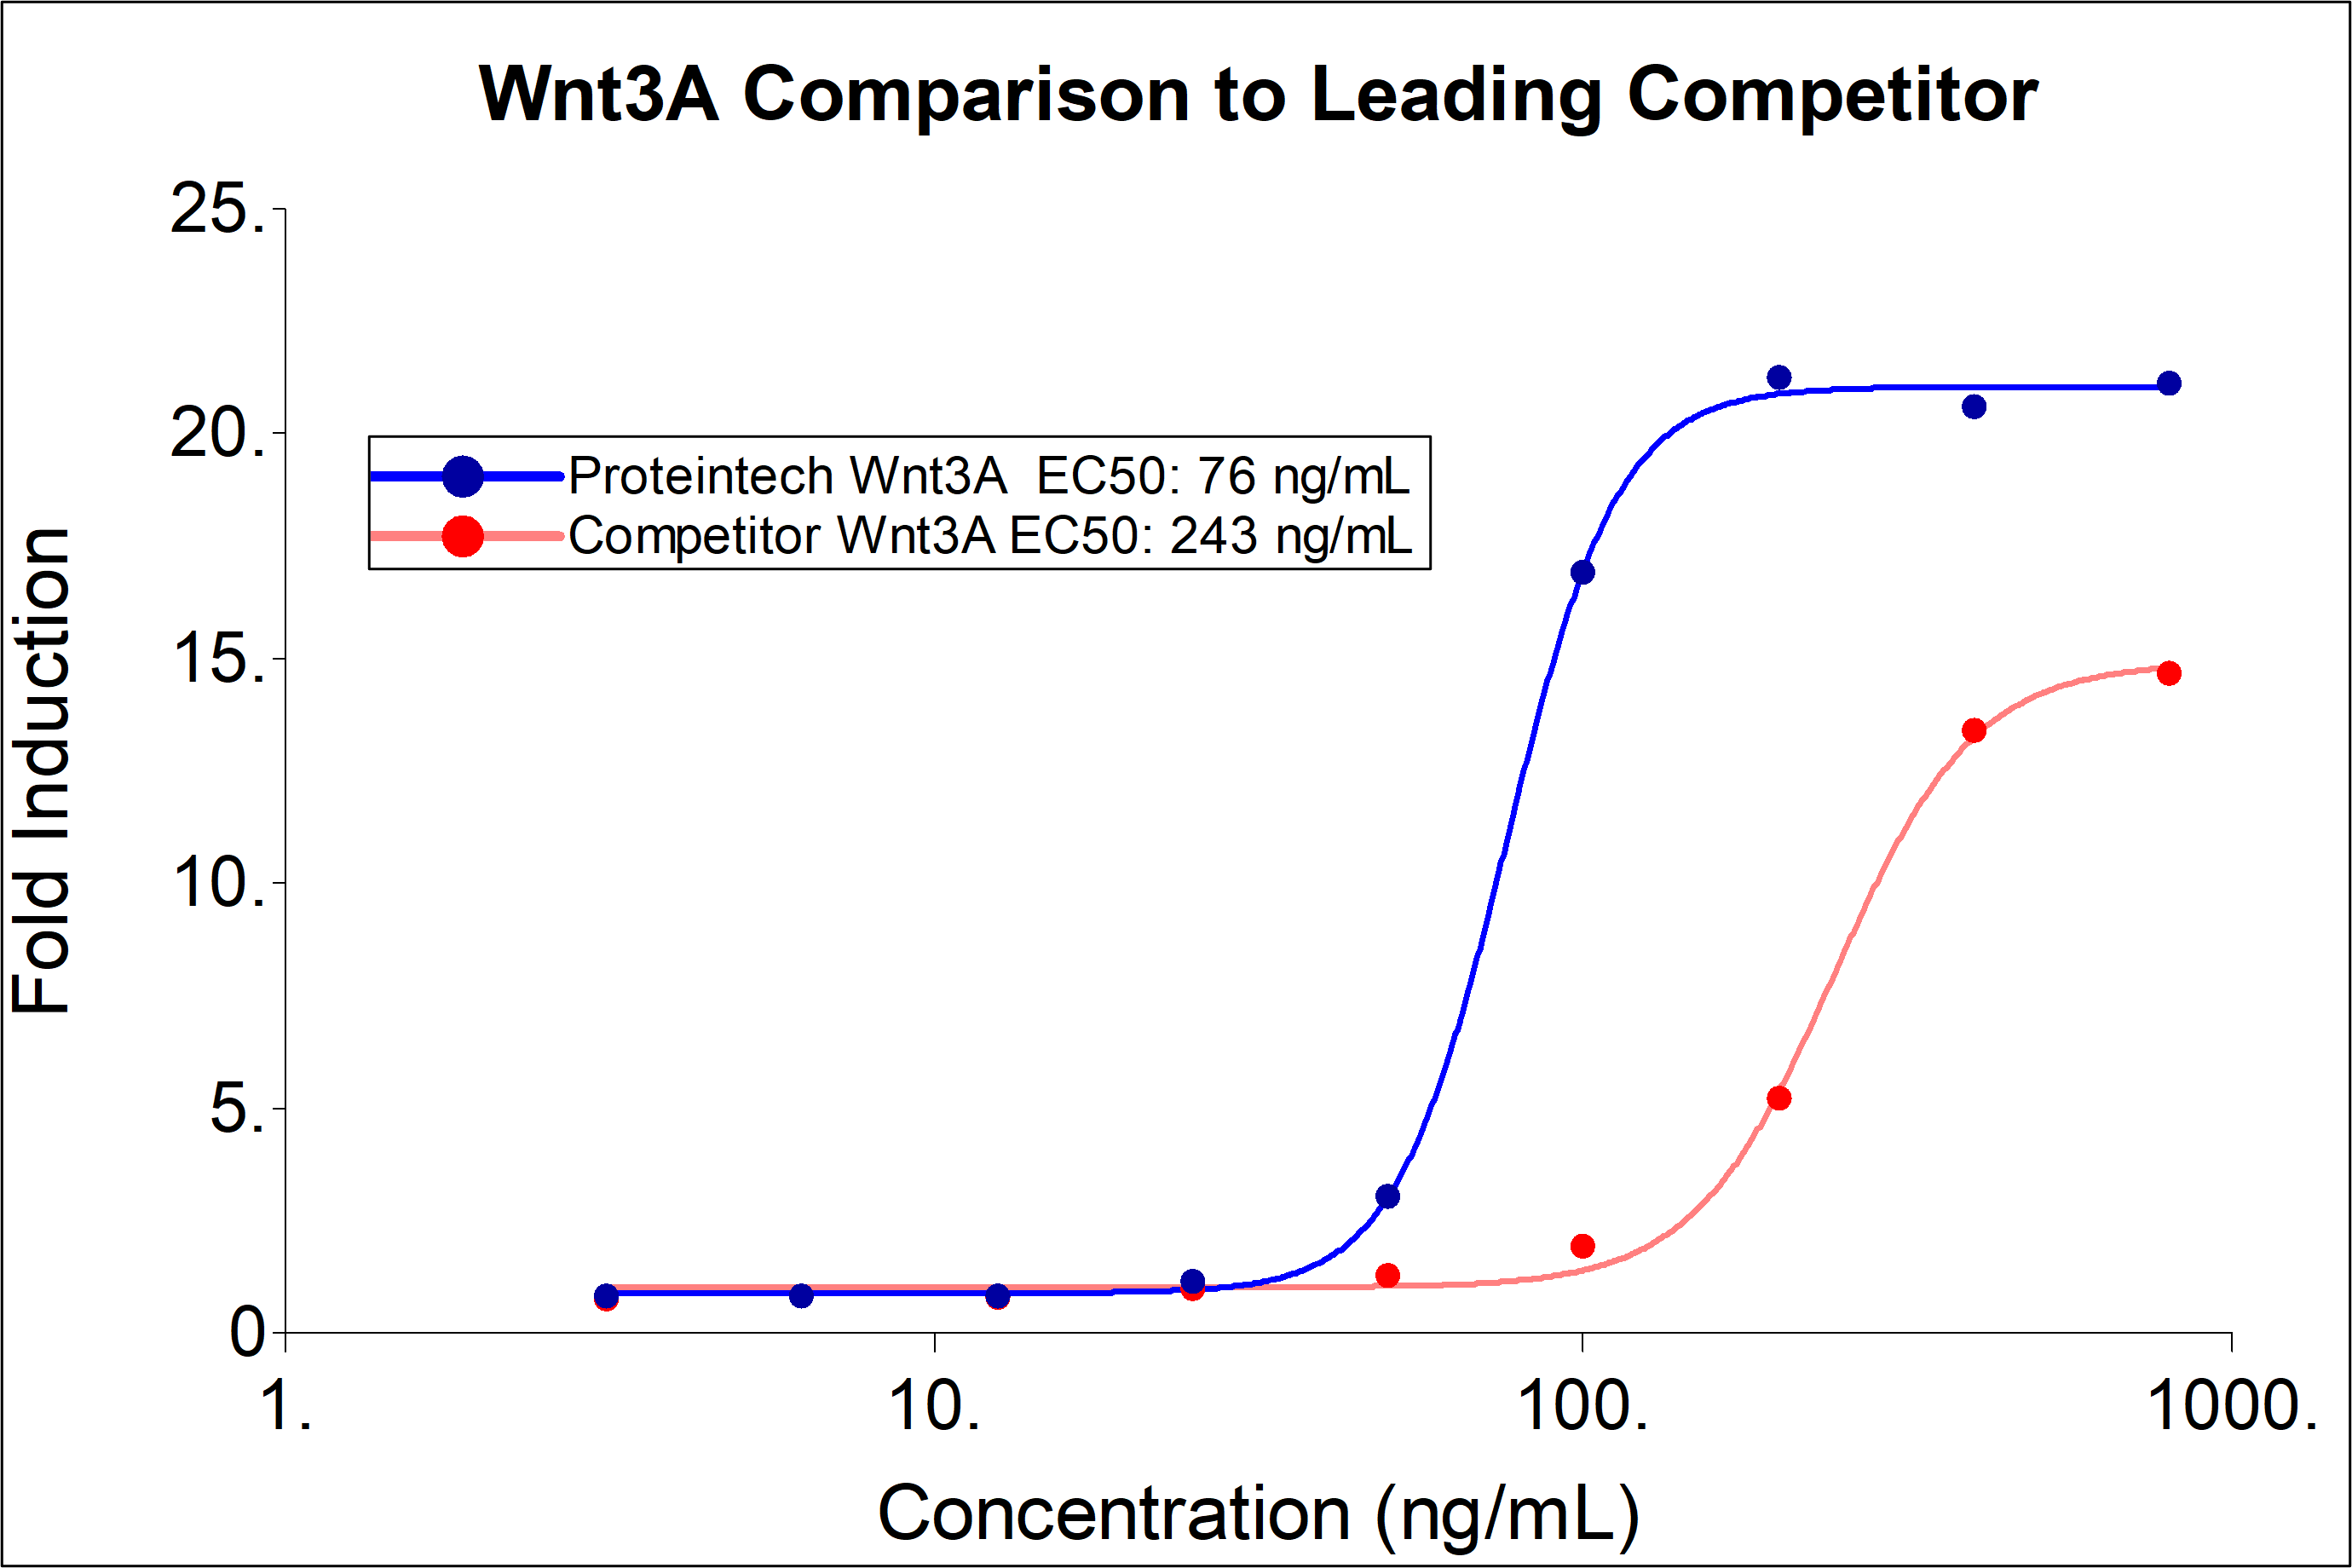 Proteintech Wnt3A (HZ-1296) demonstrates a 3-fold lower EC50 and greater induction of luciferase production than a leading competitor. Recombinant human Wnt3A induces dose-dependent luciferase production in a HEK293 TCF/LEF reporter cell line. Luciferase production was assessed by One-Step™ luciferase assay Kit. HEK293 TCF/LEF reporter cells were treated with increasing concentrations of recombinant Wnt3A for 6 hours. The EC50 was determined using a 4-Parameter non-linear regression model. The EC50 range is 25-125 ng/mL.